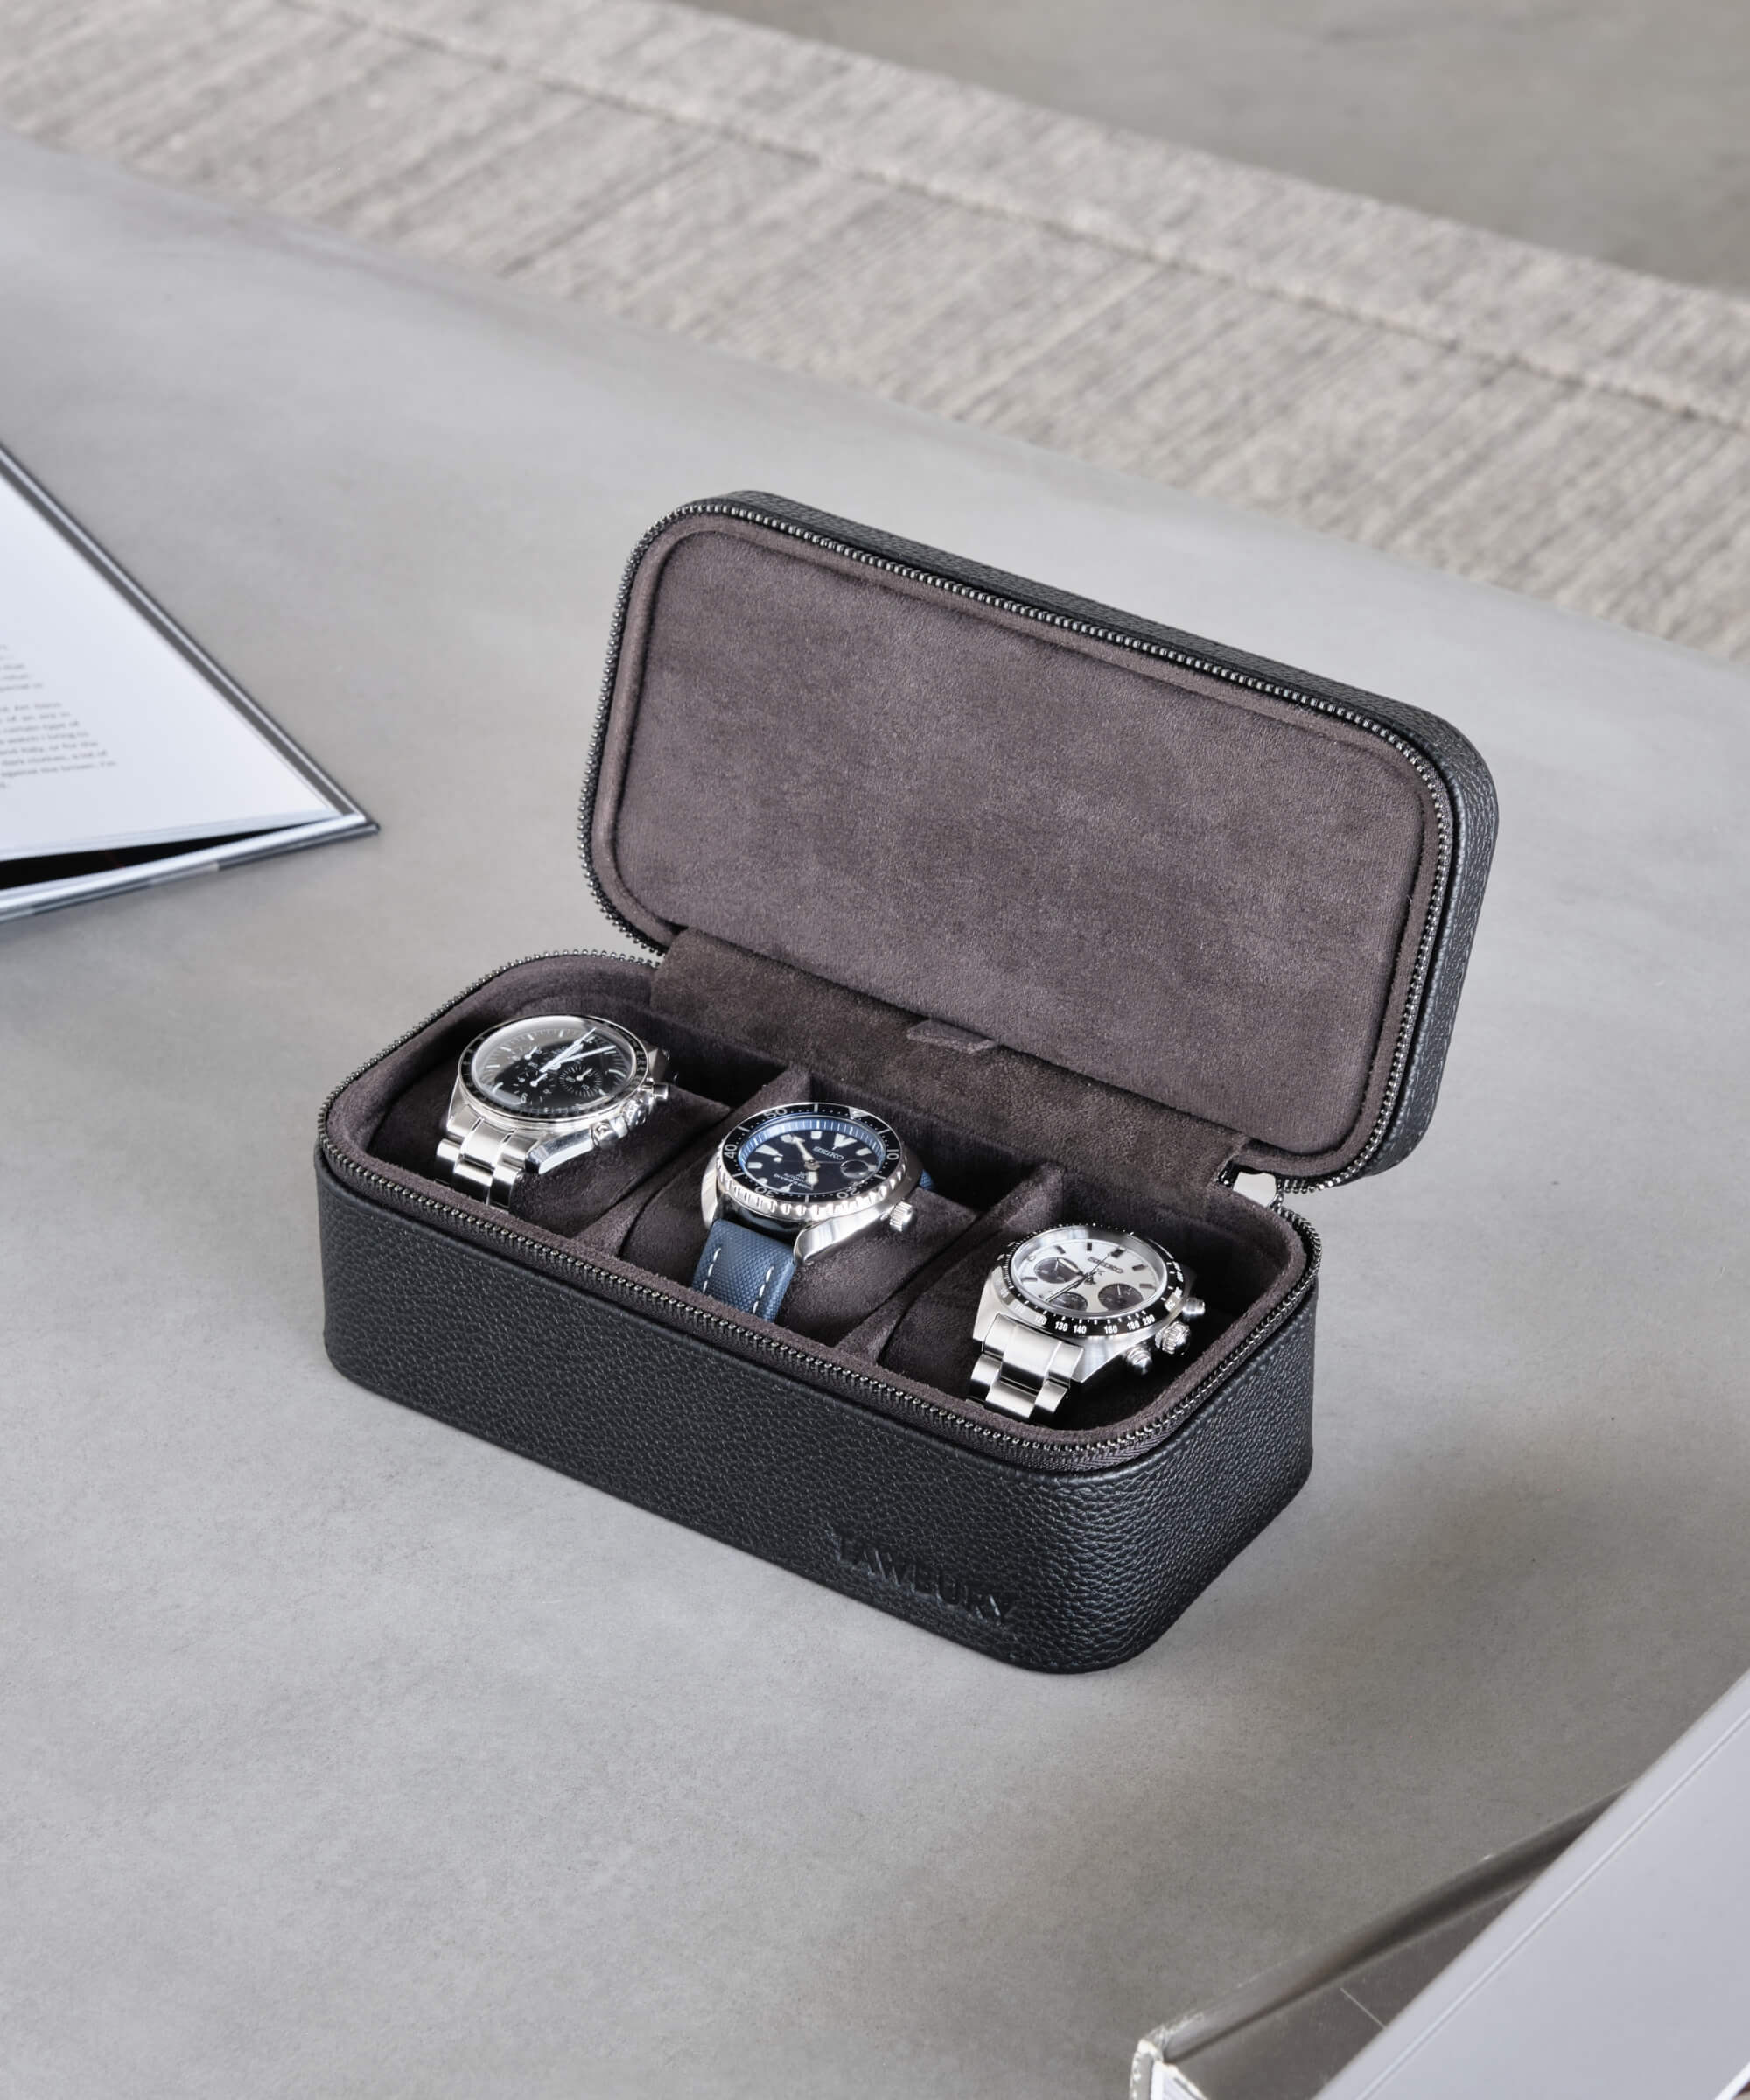 Three TAWBURY Fraser 3 Watch Travel Cases - Black in a navy blue leather case on a desk.